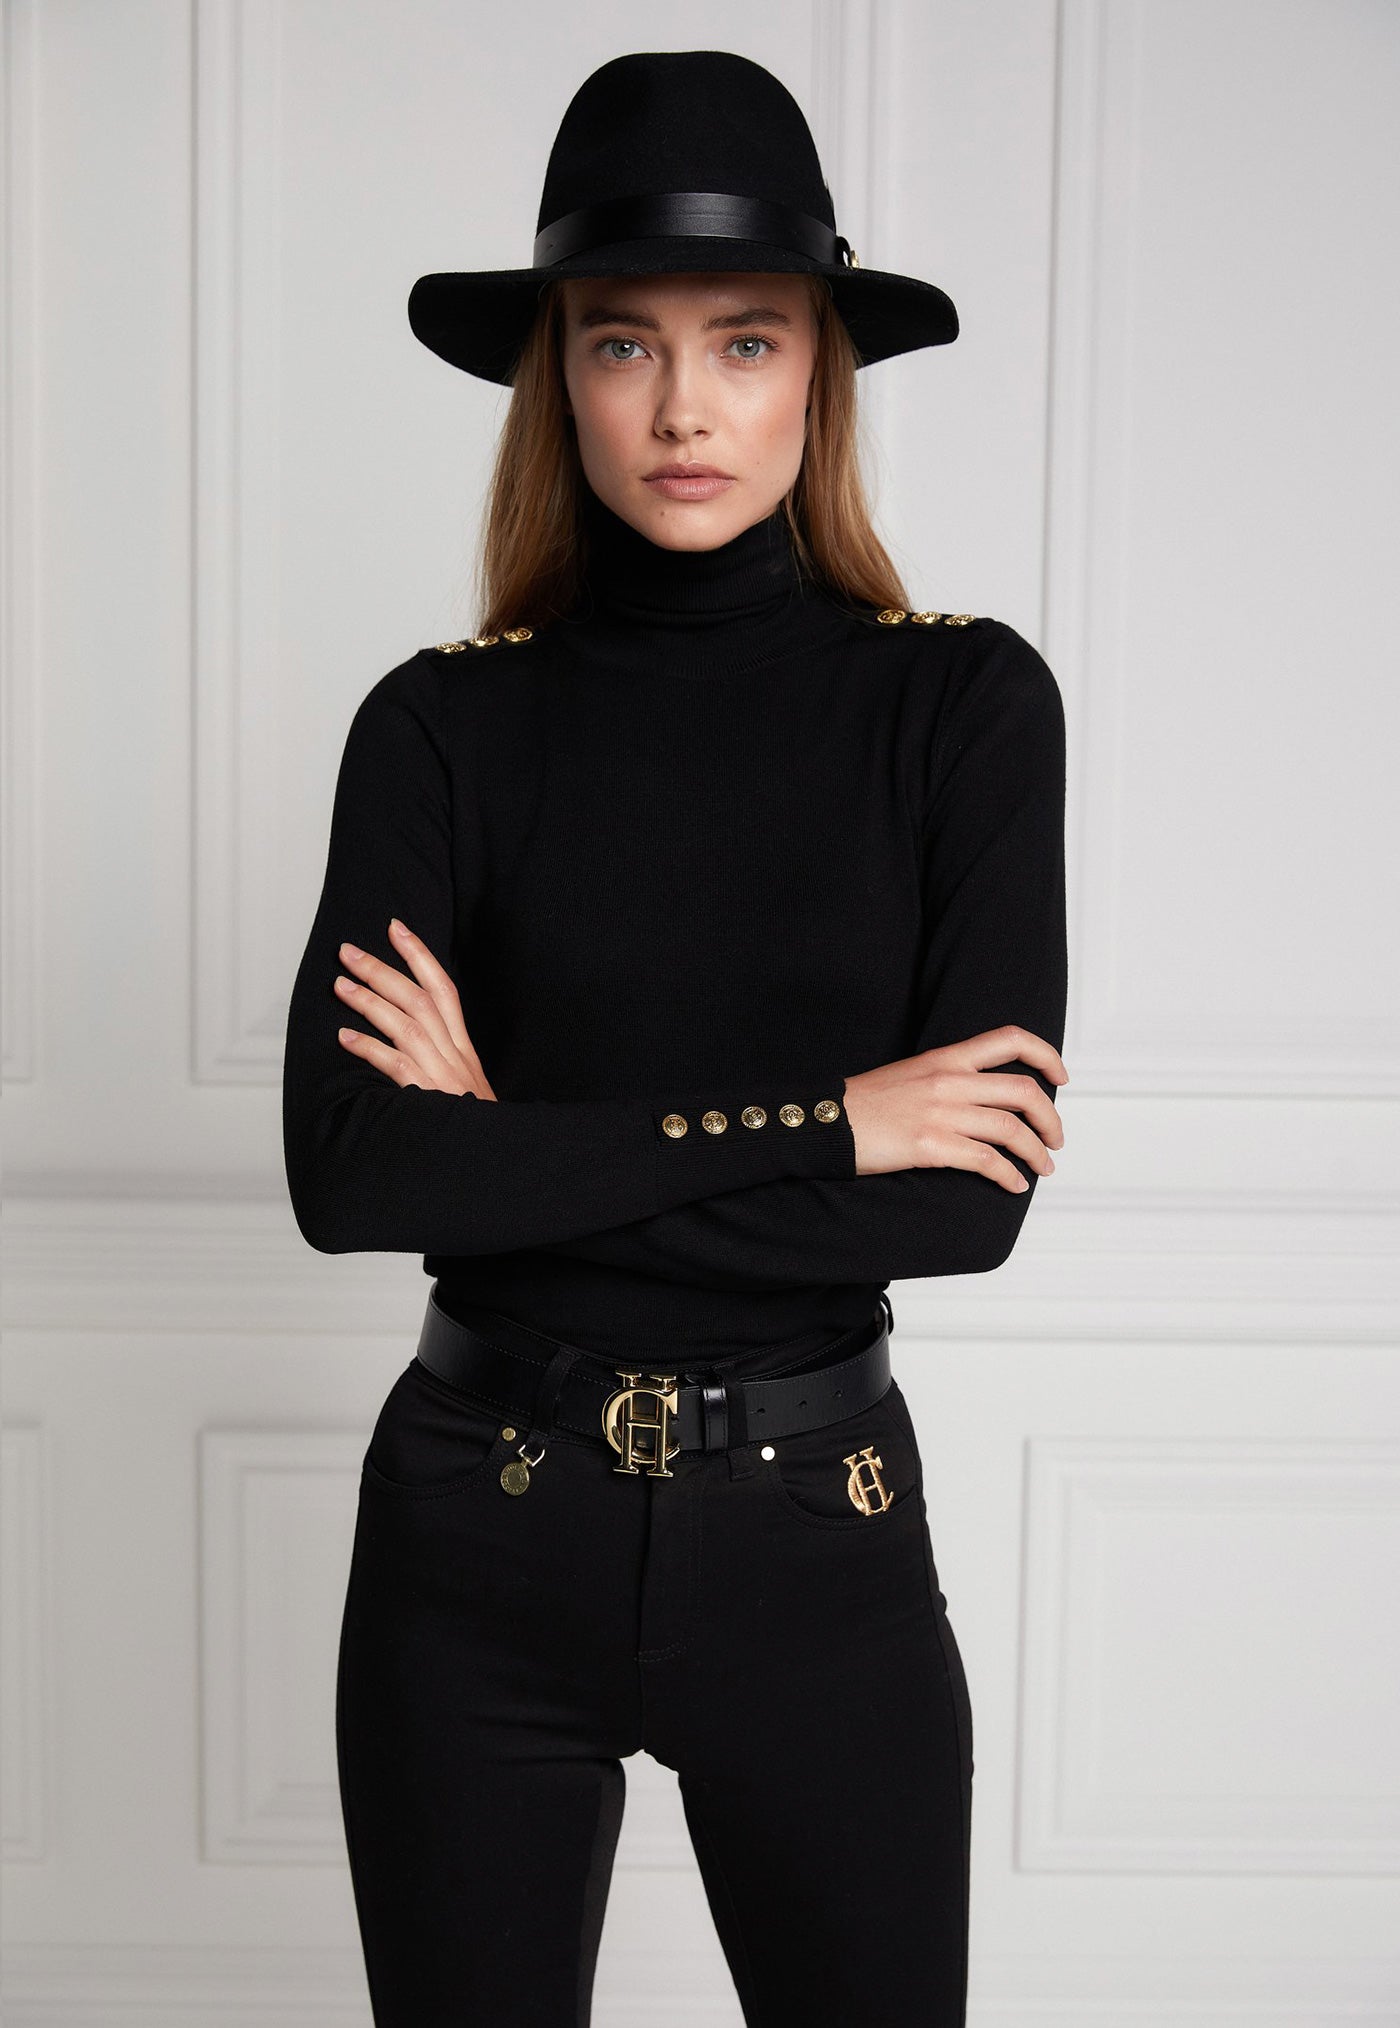 Buttoned Knit Roll Neck - Black sold by Angel Divine